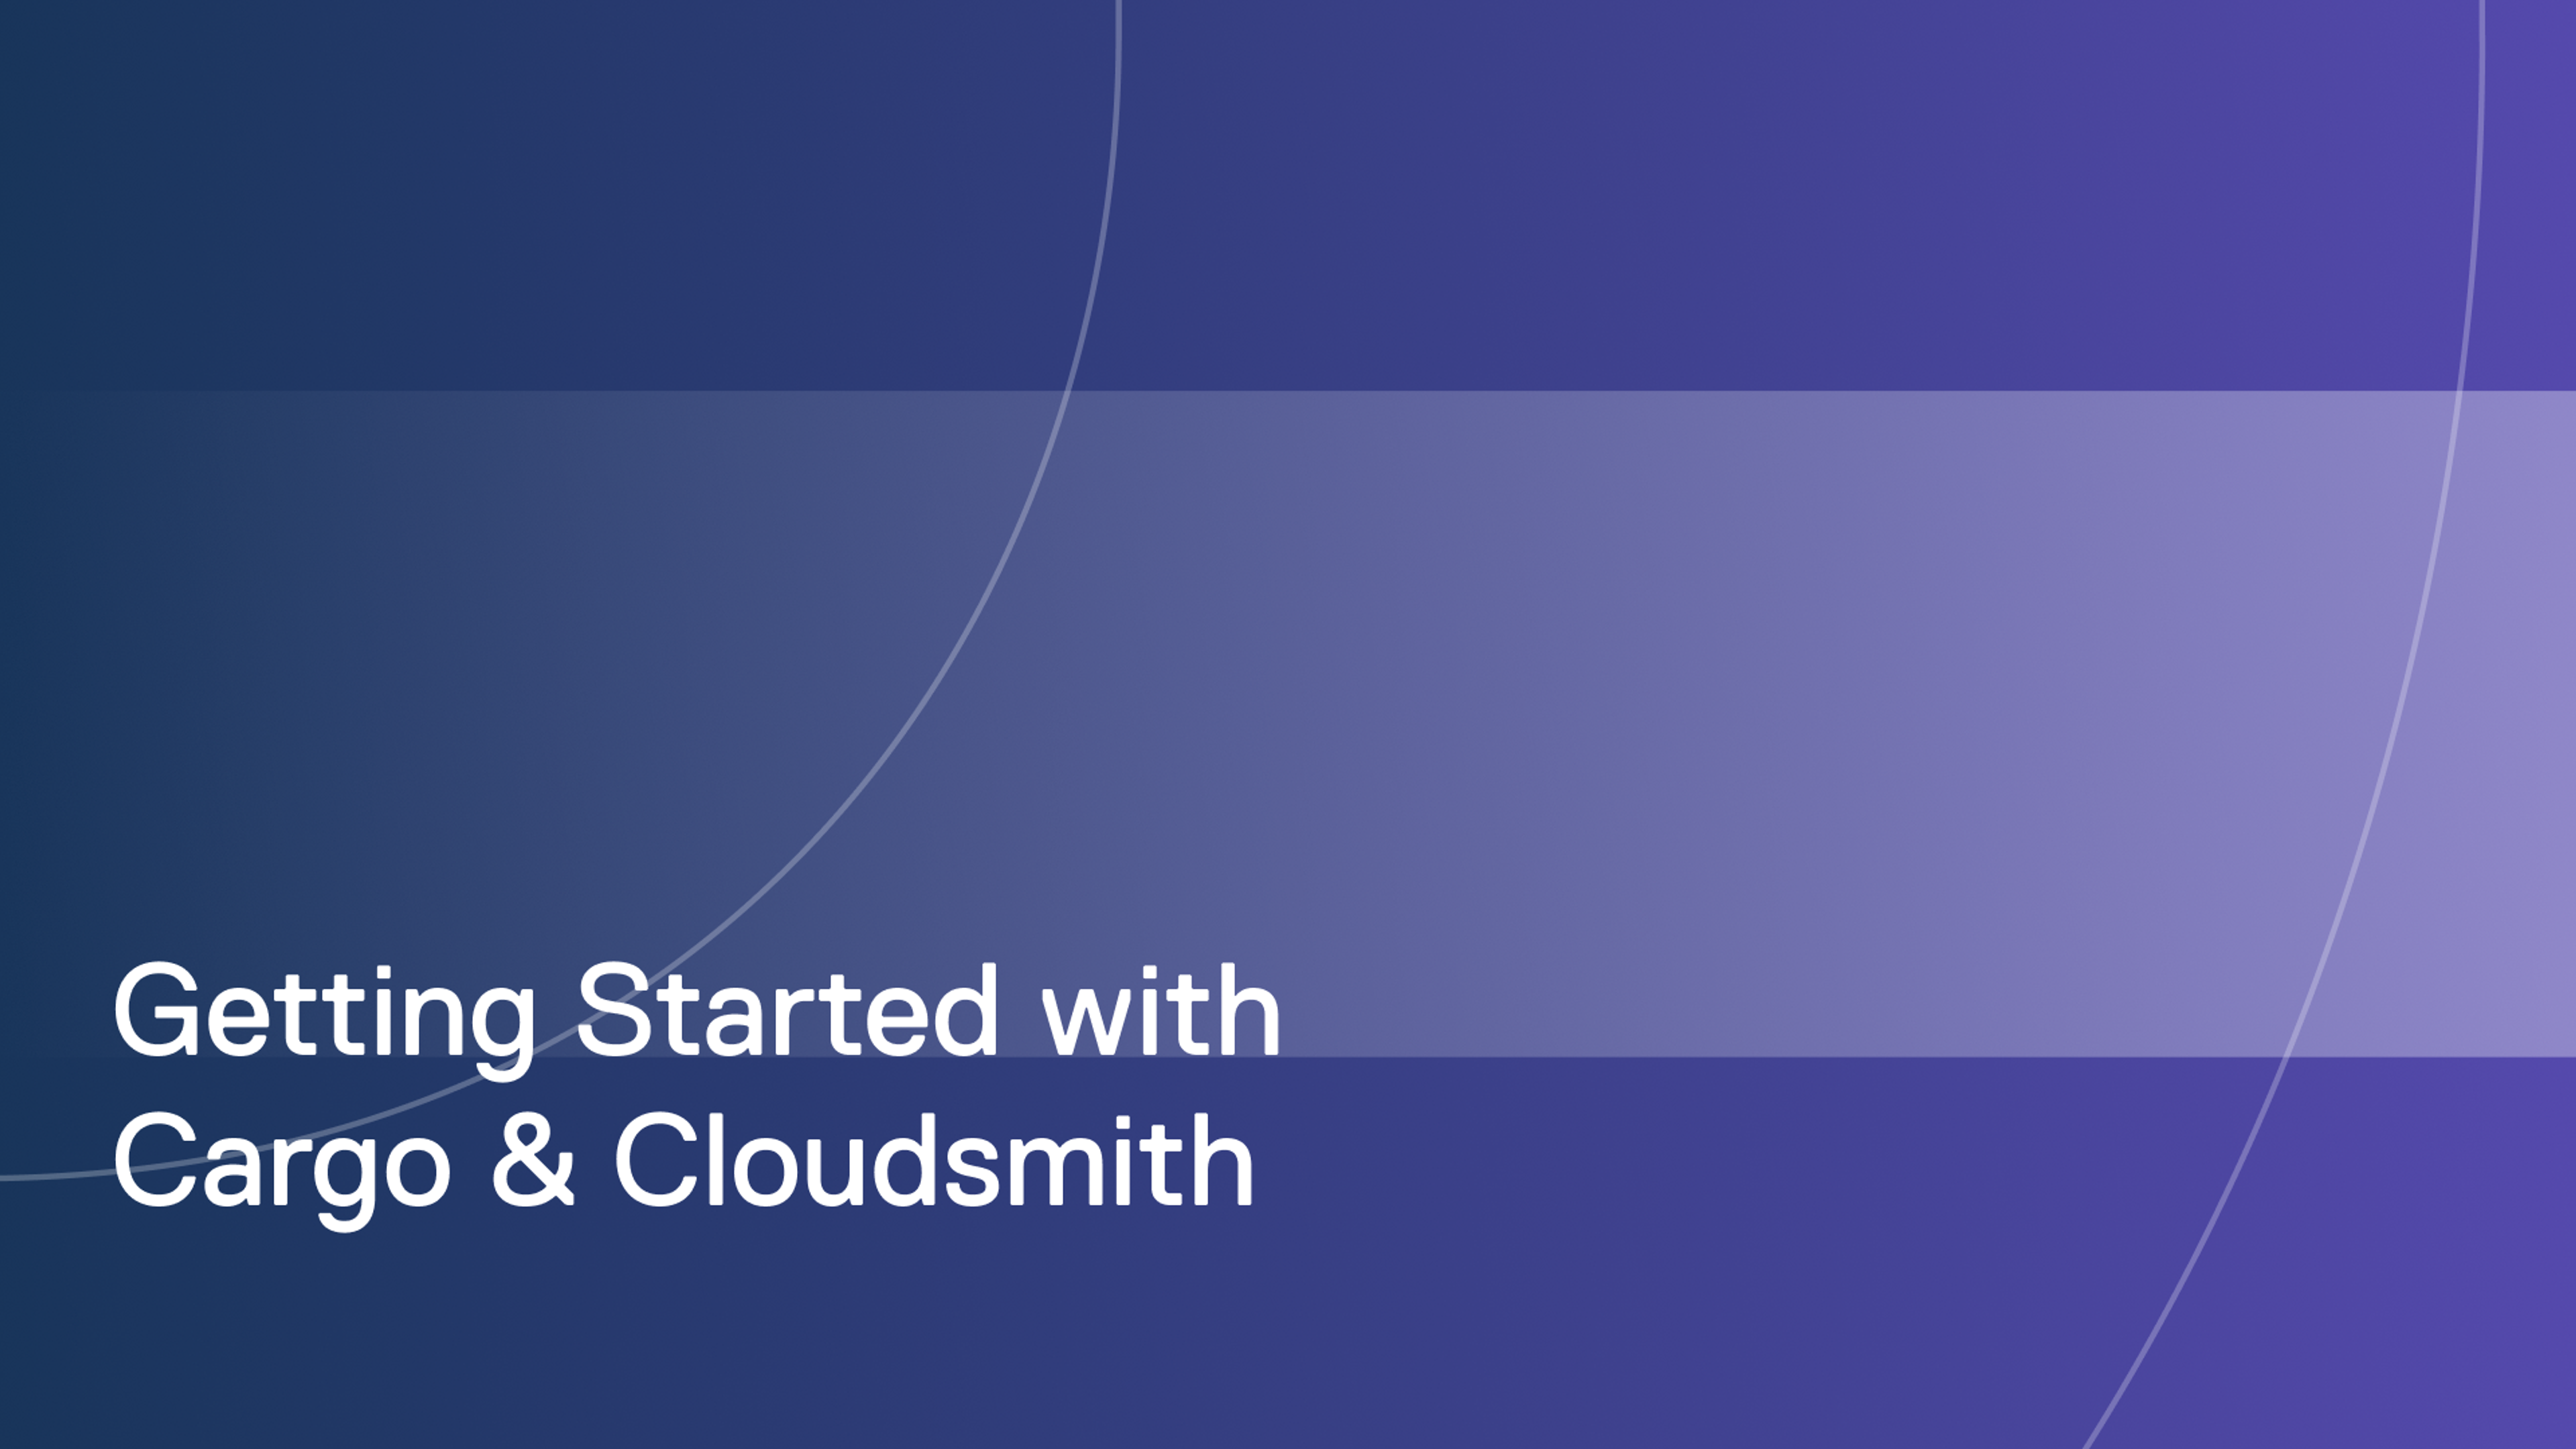 Getting started with Cargo and Cloudsmith